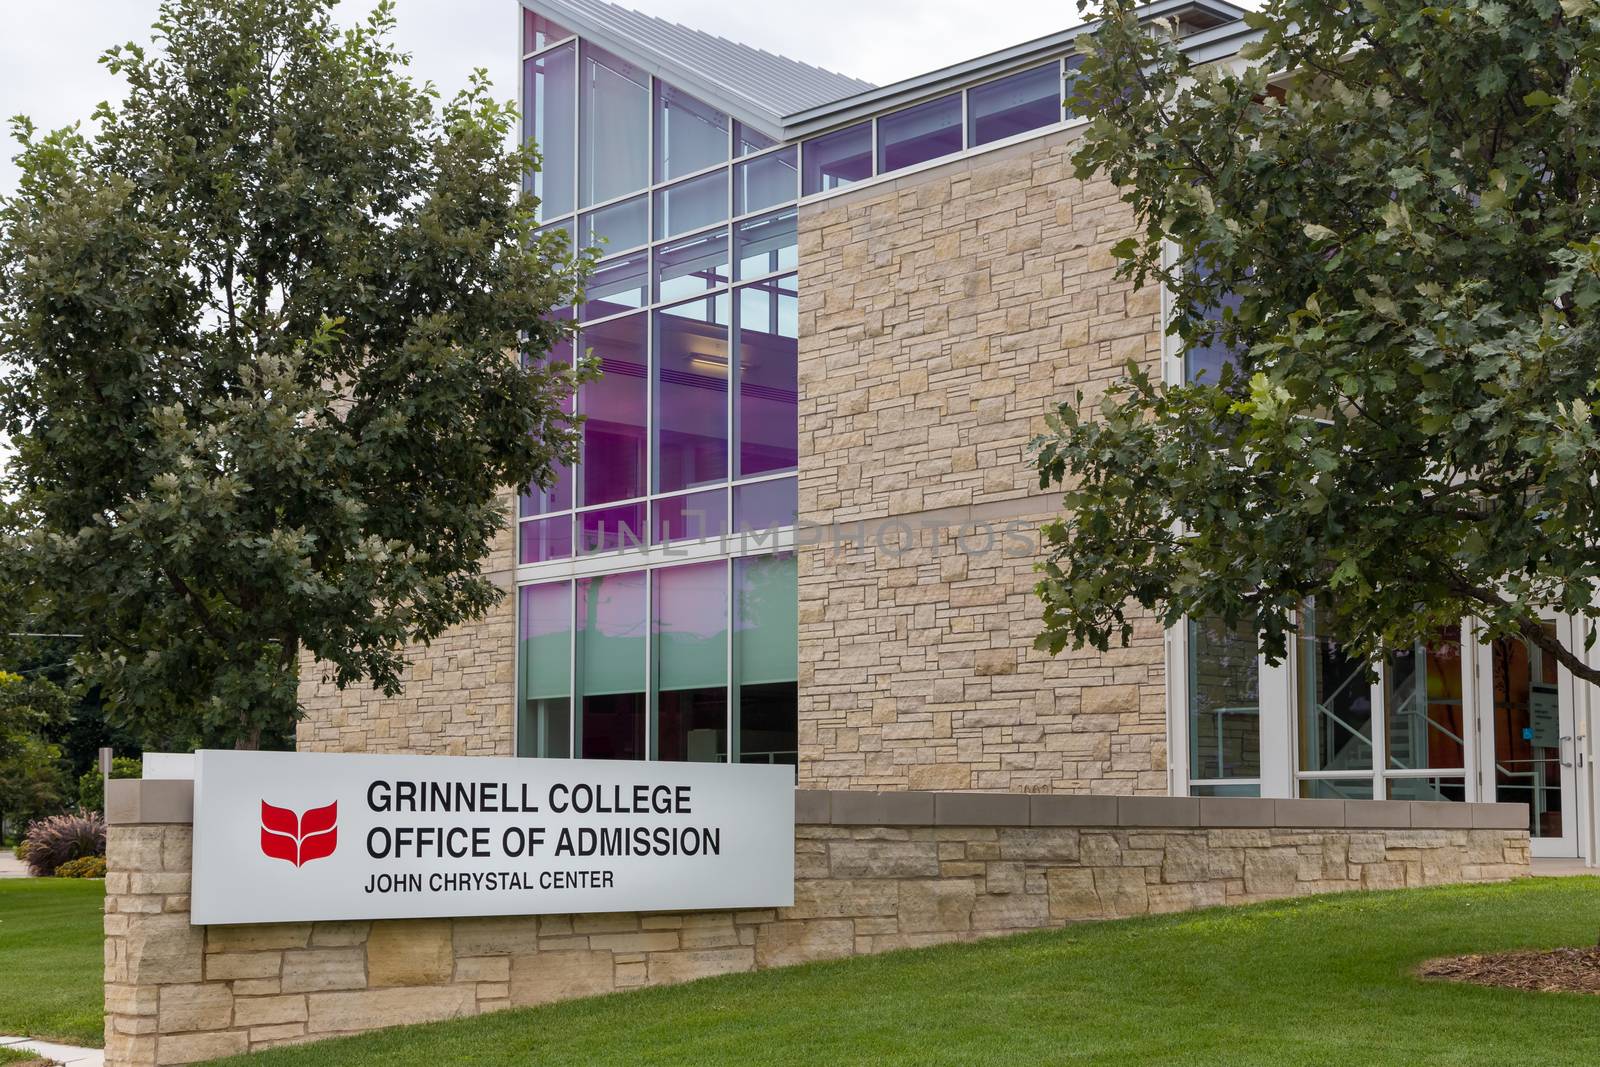 Grinnell College Office of Admission on the campus of Grinell Co by wolterk